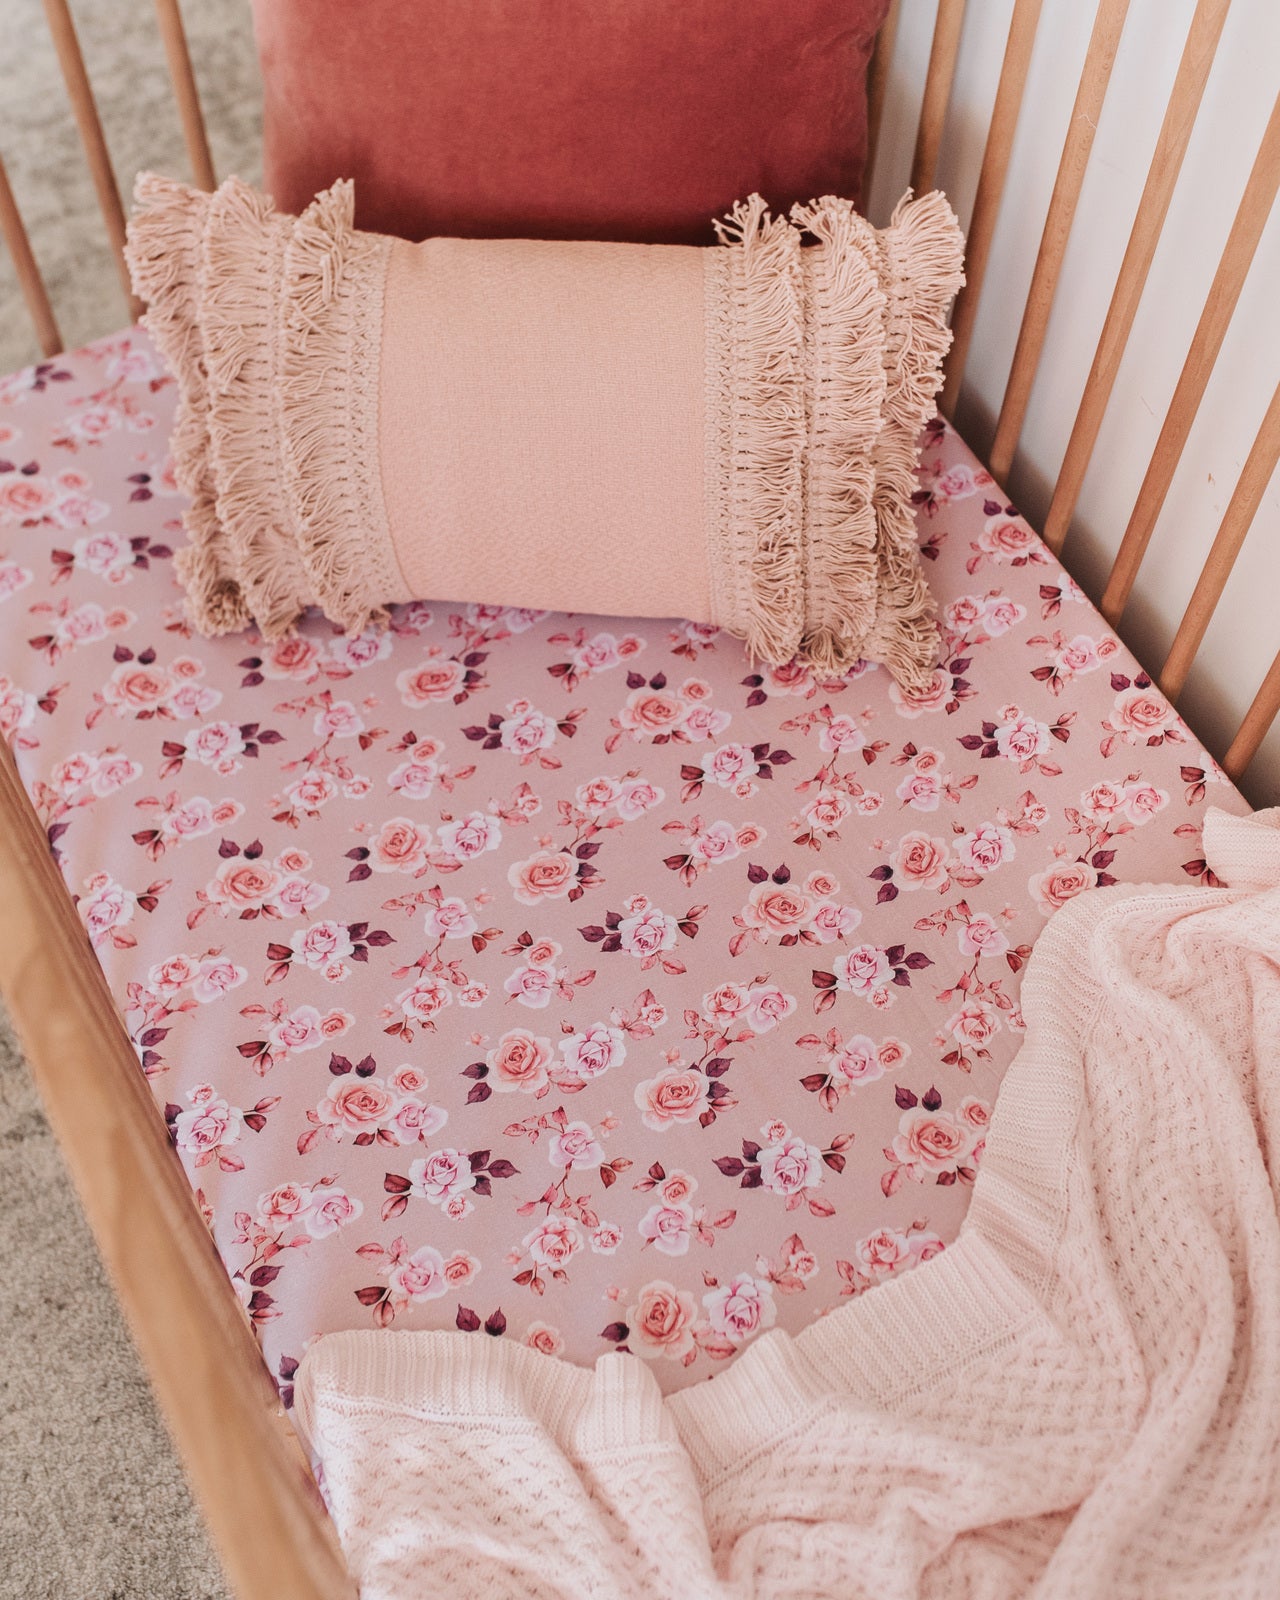 Snuggle Hunny Kids - Fitted Cot Sheet (Blossom)